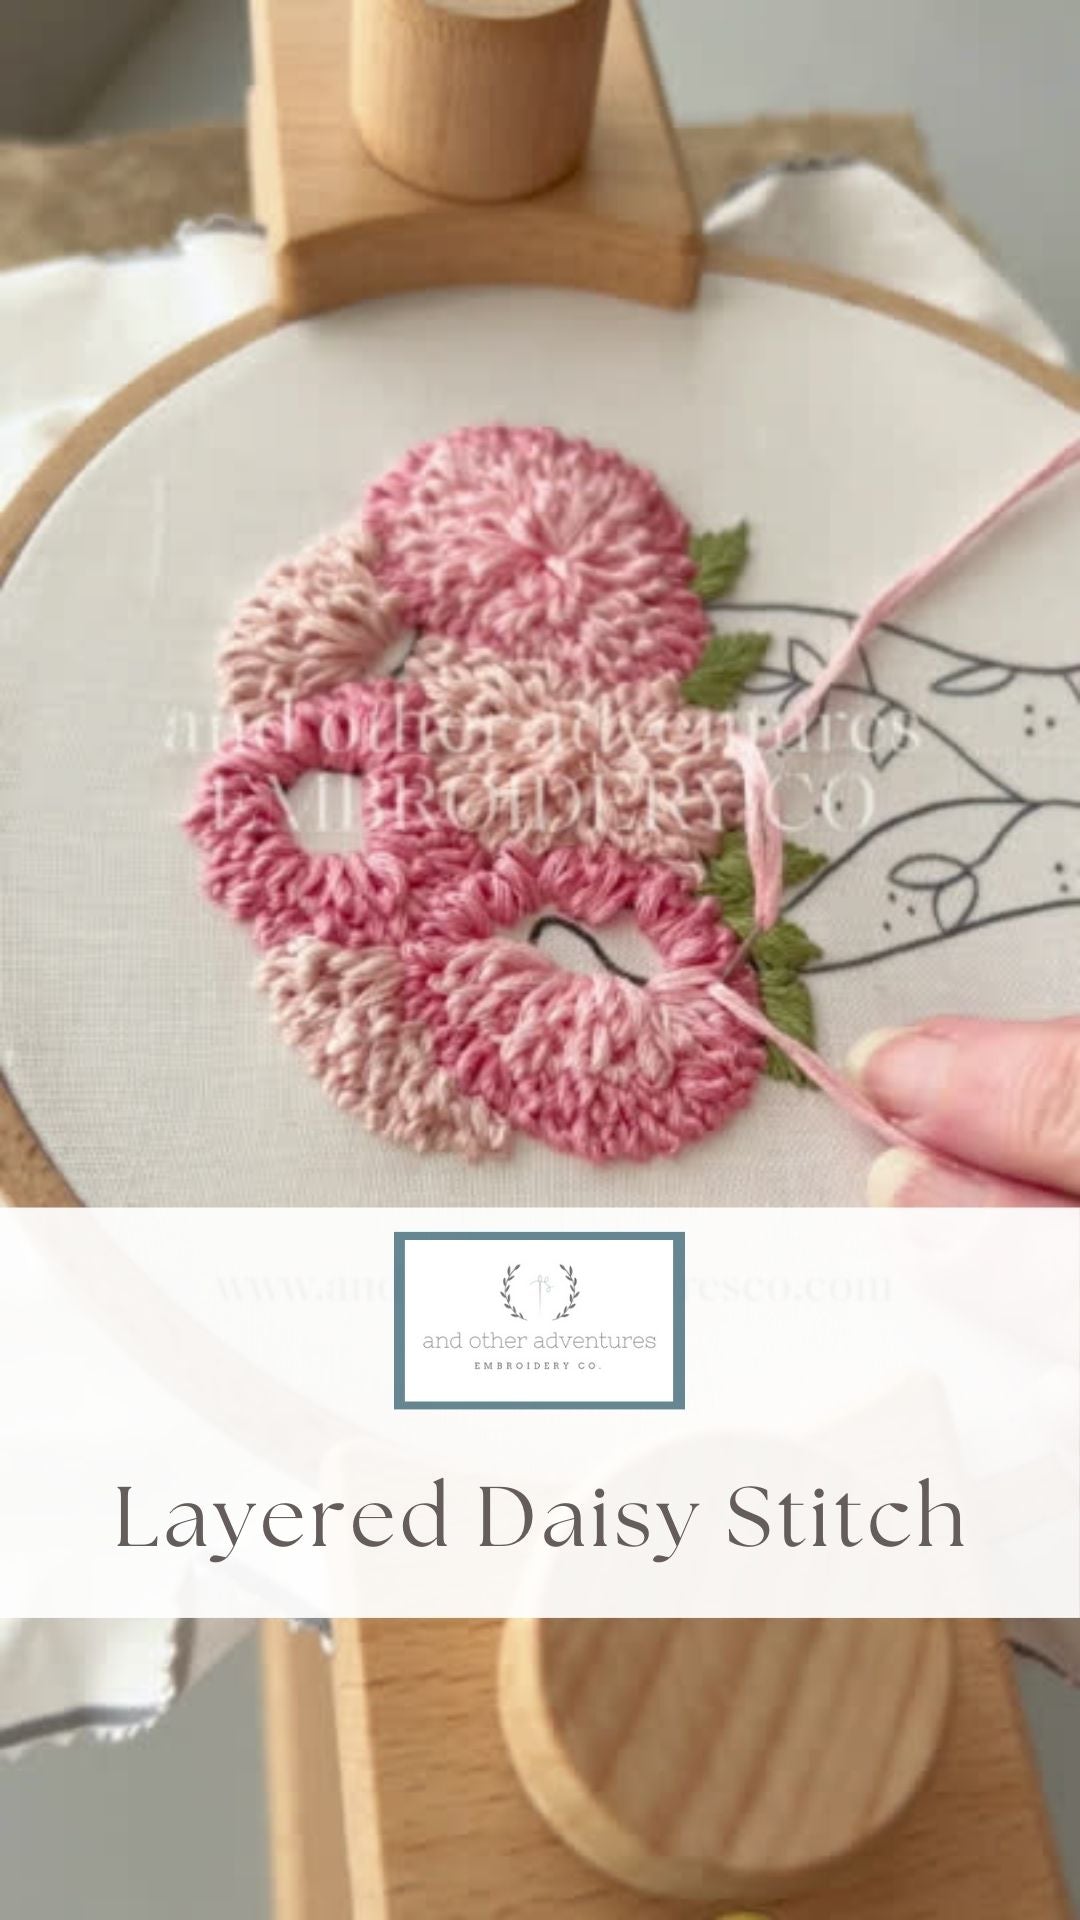 Behind the scenes - Layered Daisy Stitch of Pink Dahlias embroidered by And Other Adventures Embroidery Co